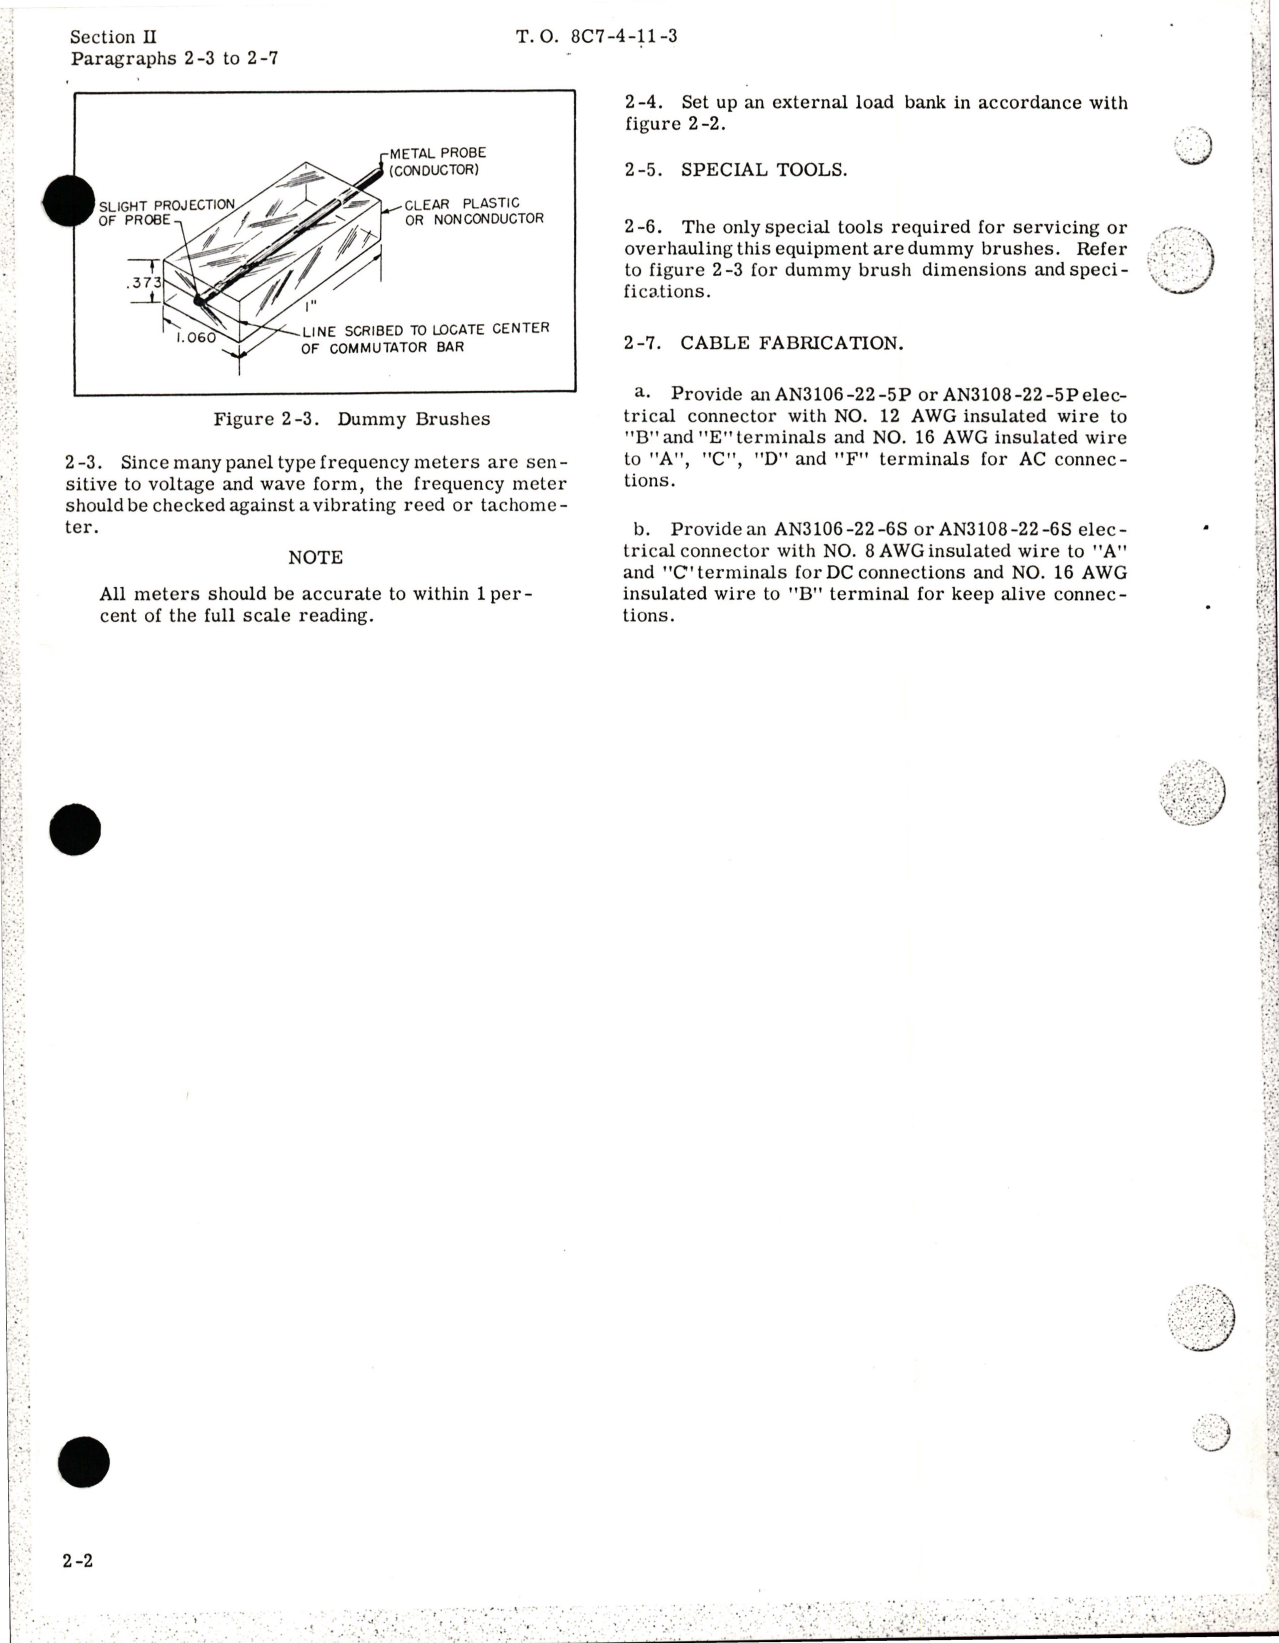 Sample page 9 from AirCorps Library document: Overhaul Instructions for Inverter Assembly - Parts MGE-22-1, MGE-22-100